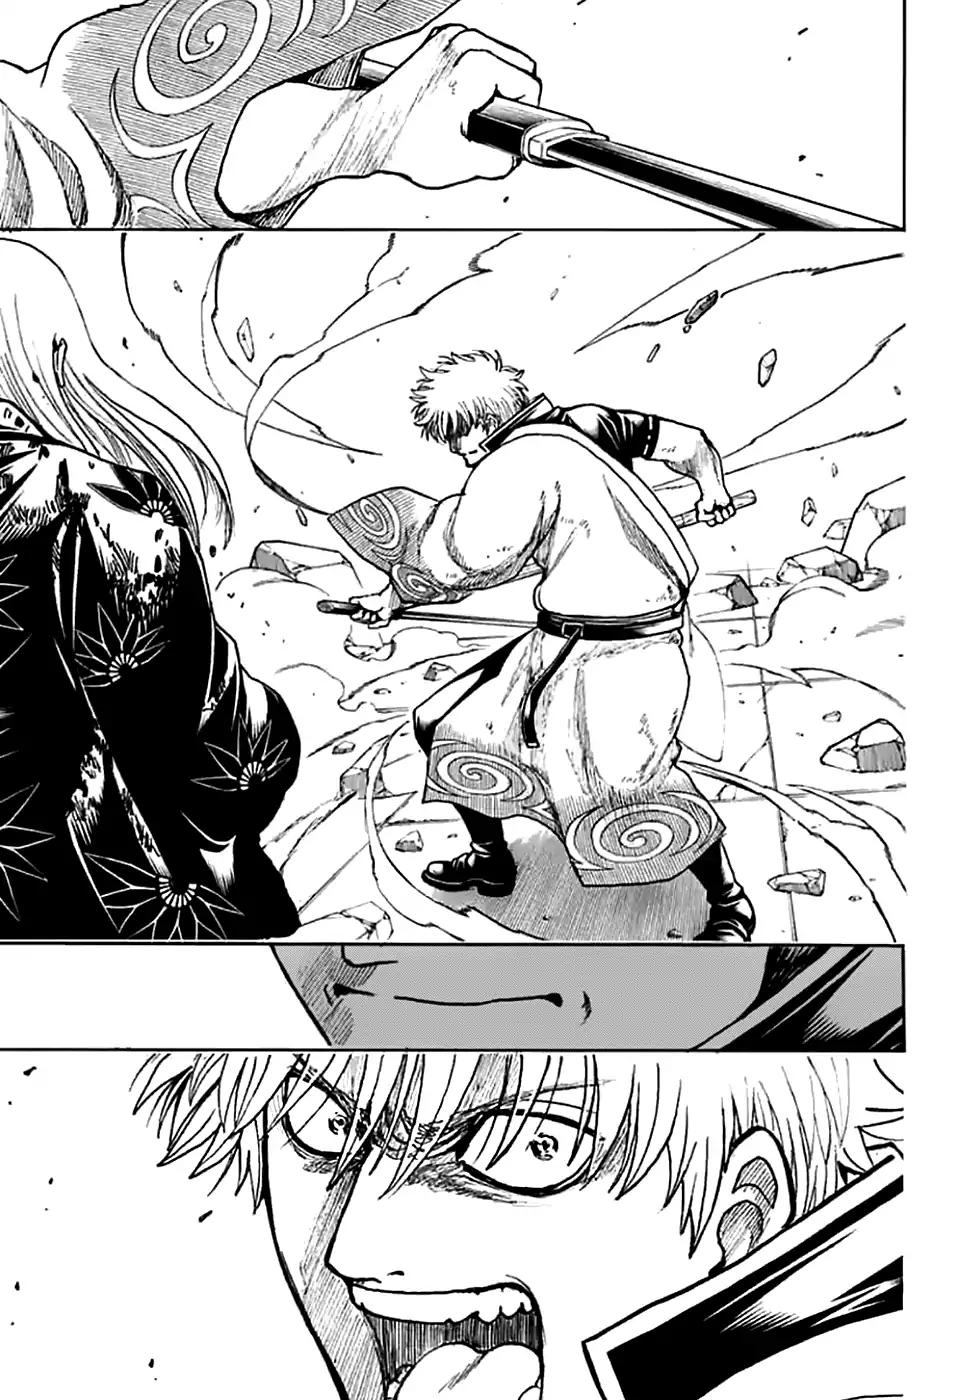 Gintama chapter 703 page 27